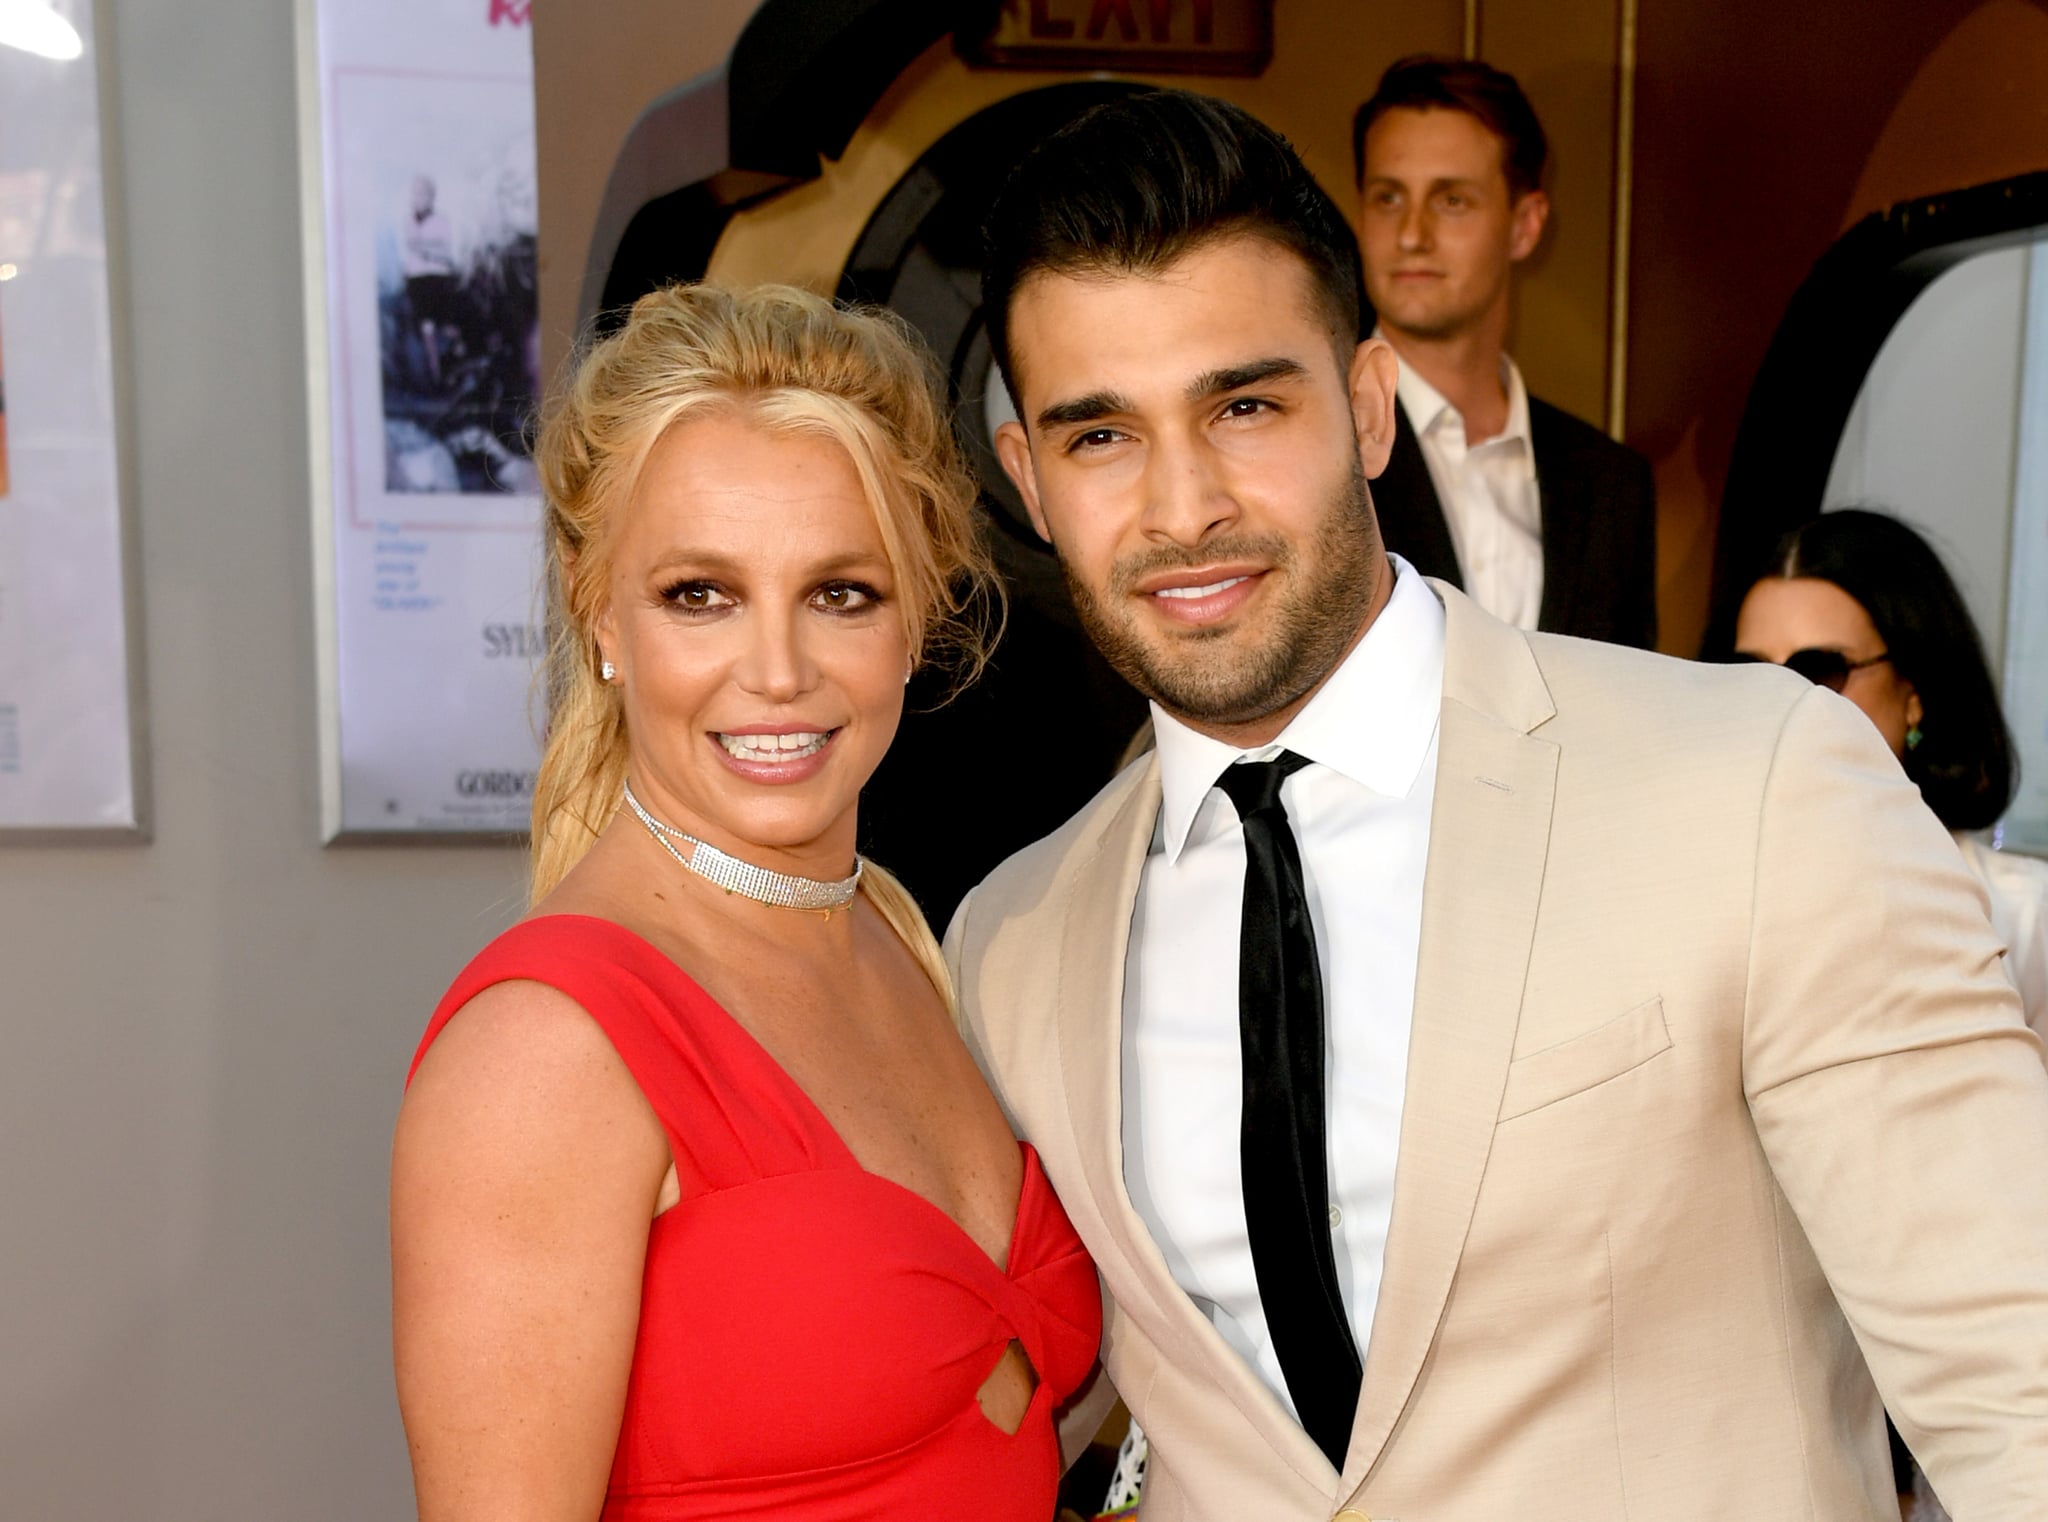 HOLLYWOOD, CALIFORNIA - JULY 22: Britney Spears (L) and Sam Asghari arrive at the premiere of Sony Pictures' 